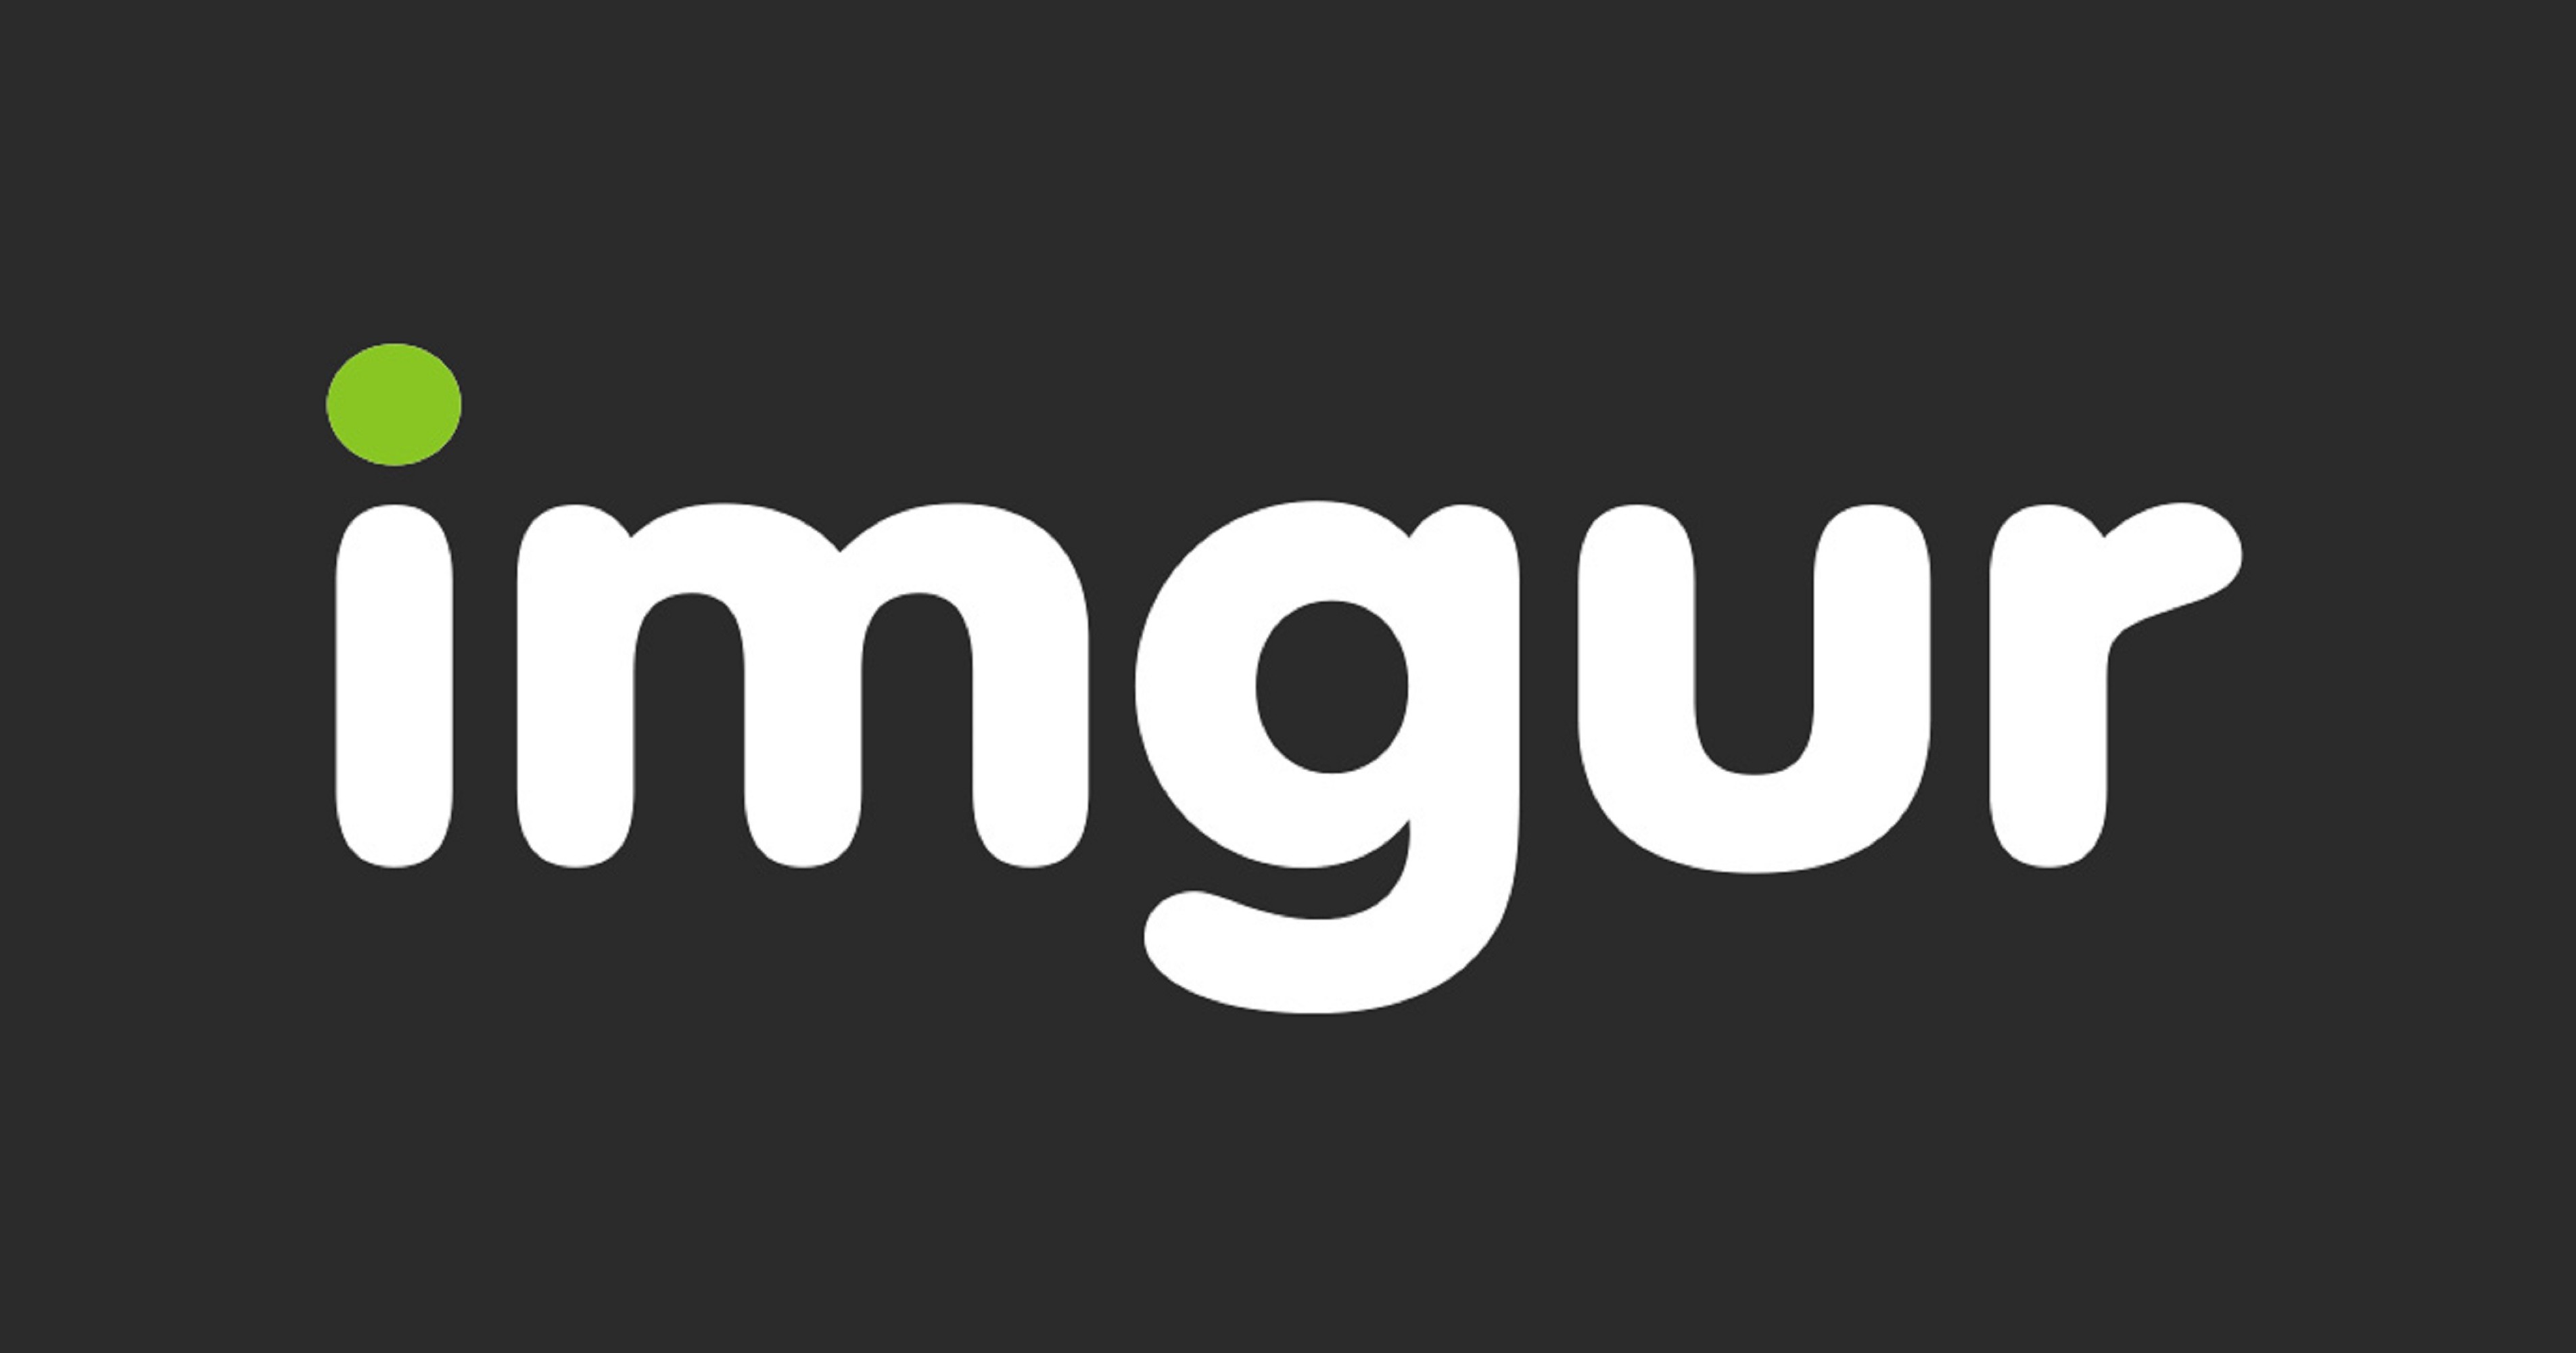 Imgur Nudist Group - Imgur Is About to Wipe a Ton of Porn From the Internet